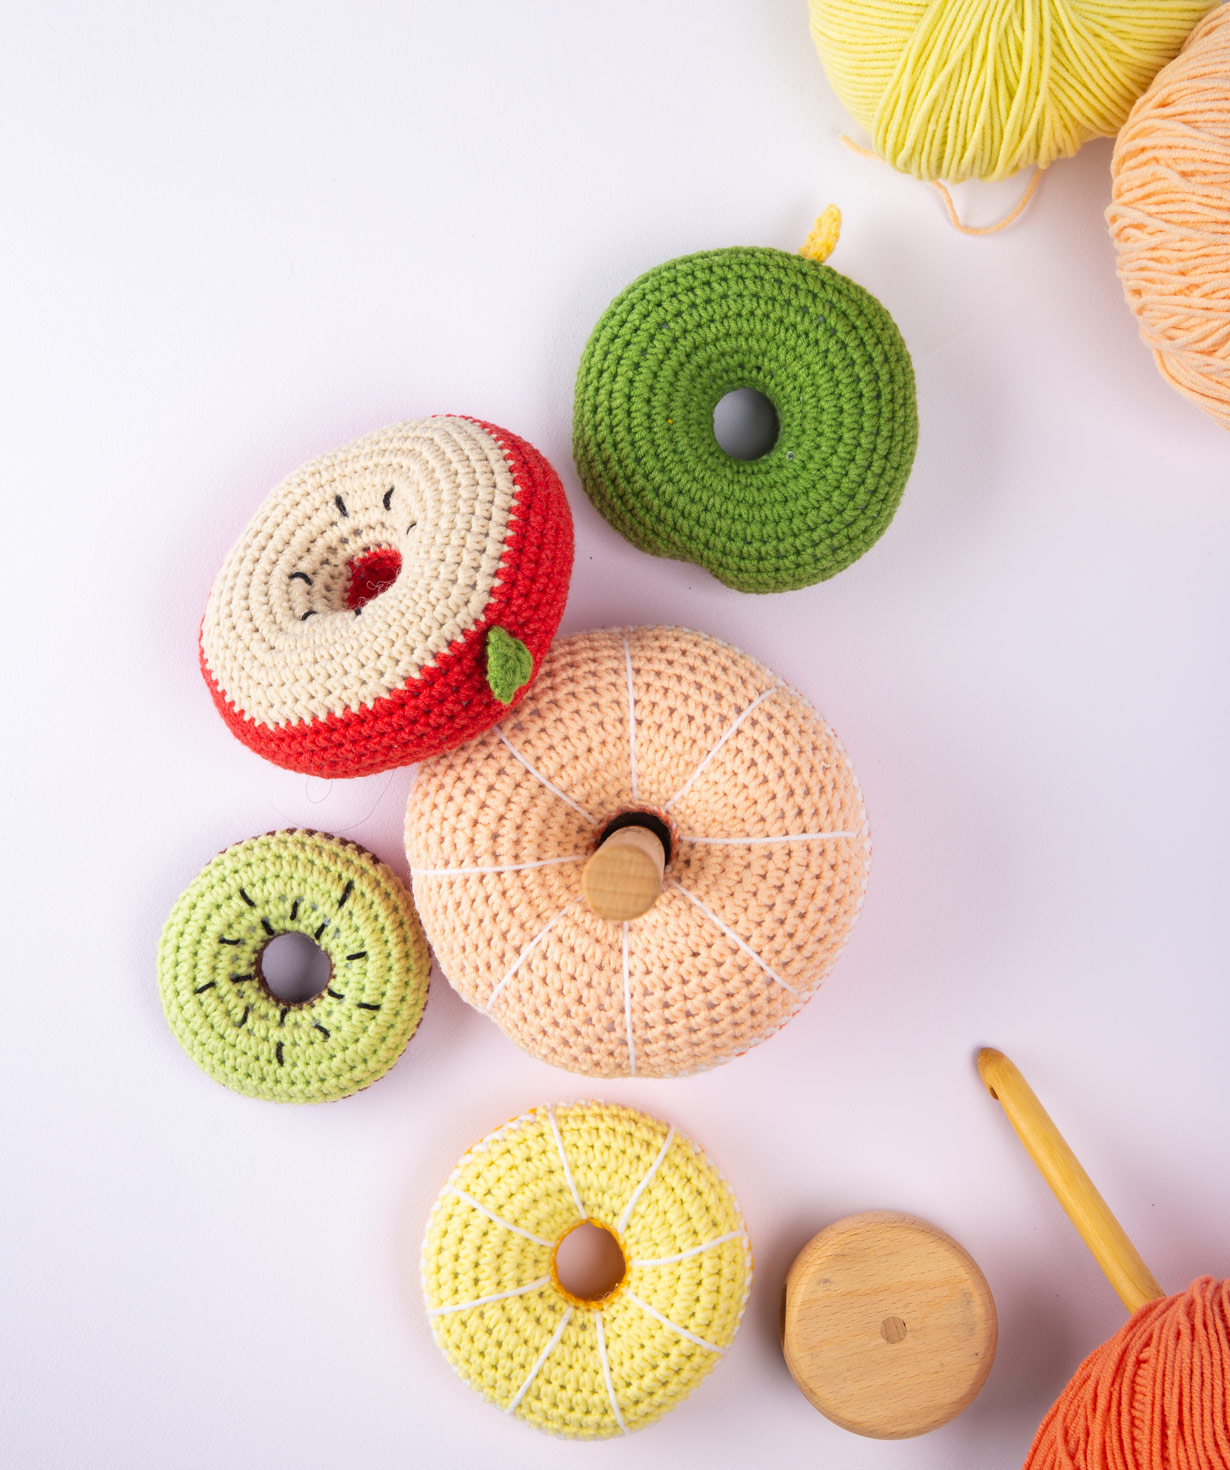 Rattle `Crafts by Ro` Fruit pyramid